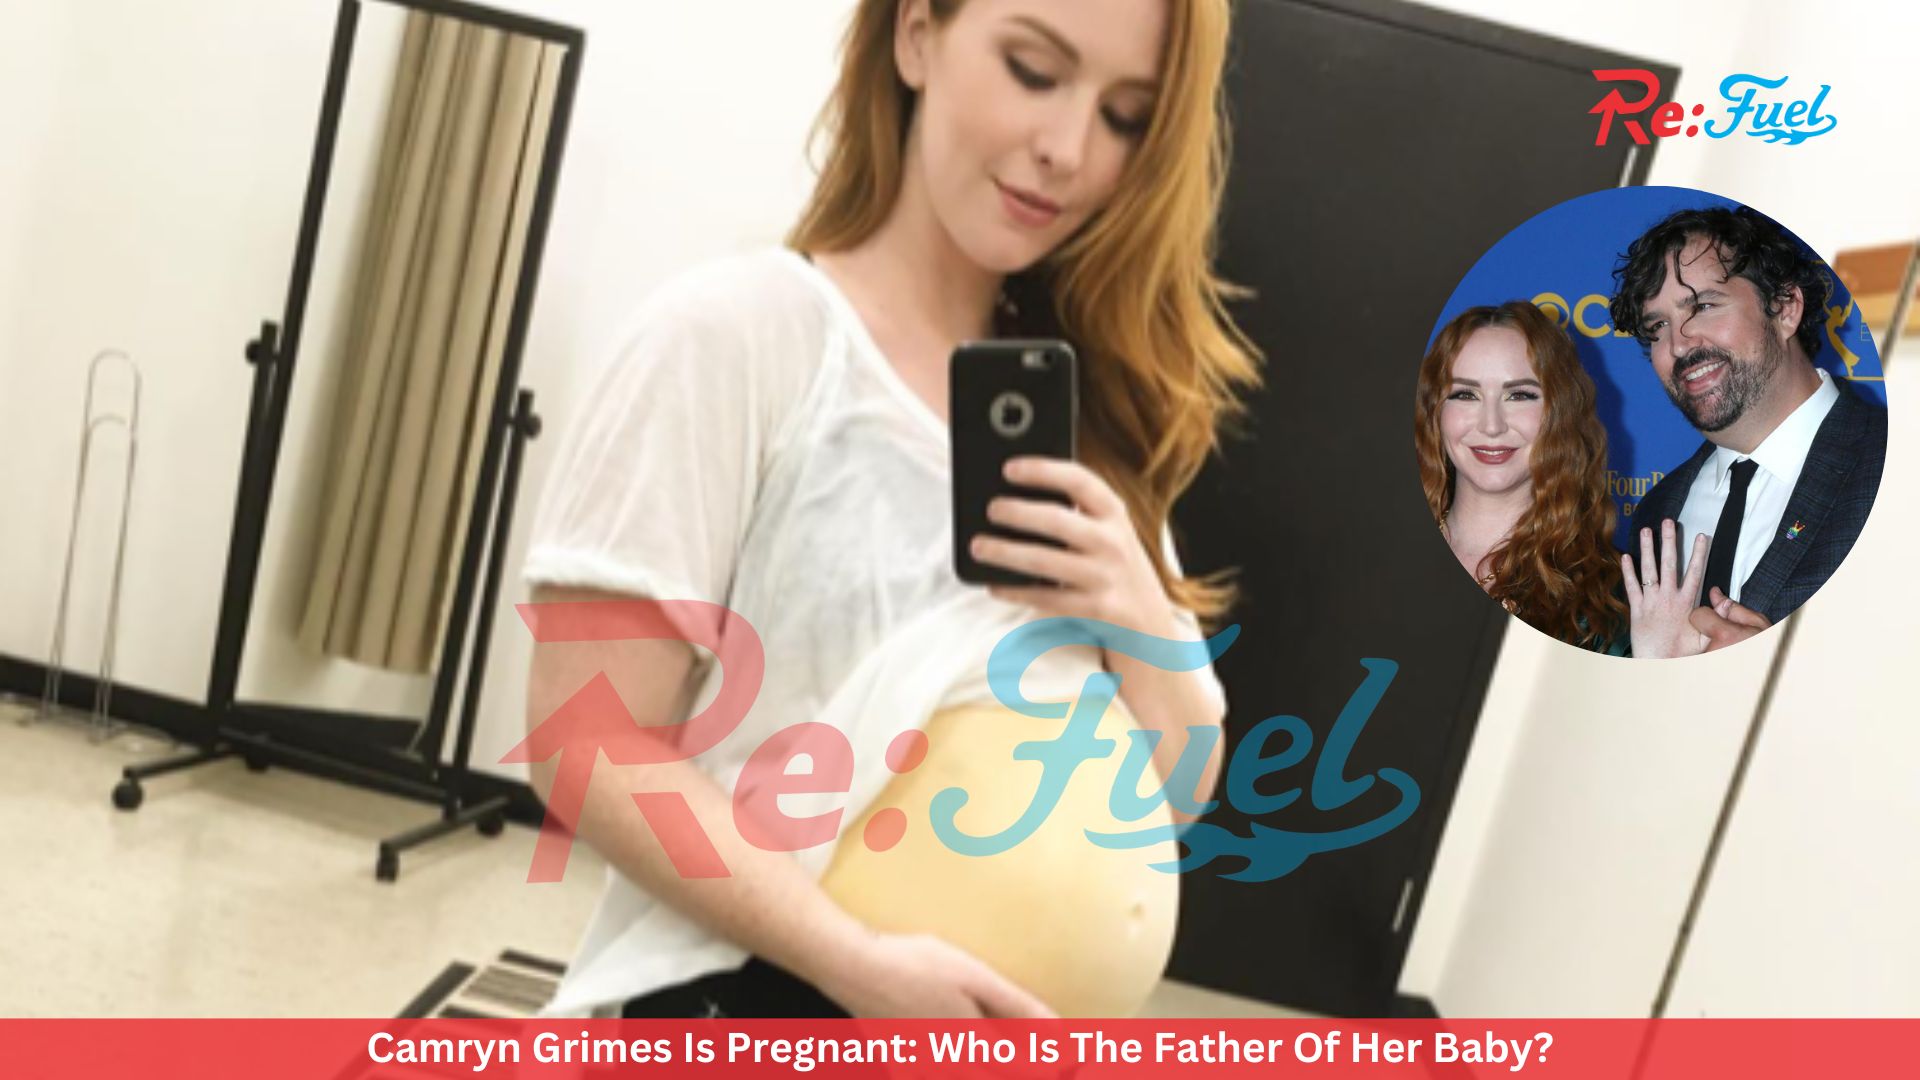 Camryn Grimes Is Pregnant: Who Is The Father Of Her Baby?